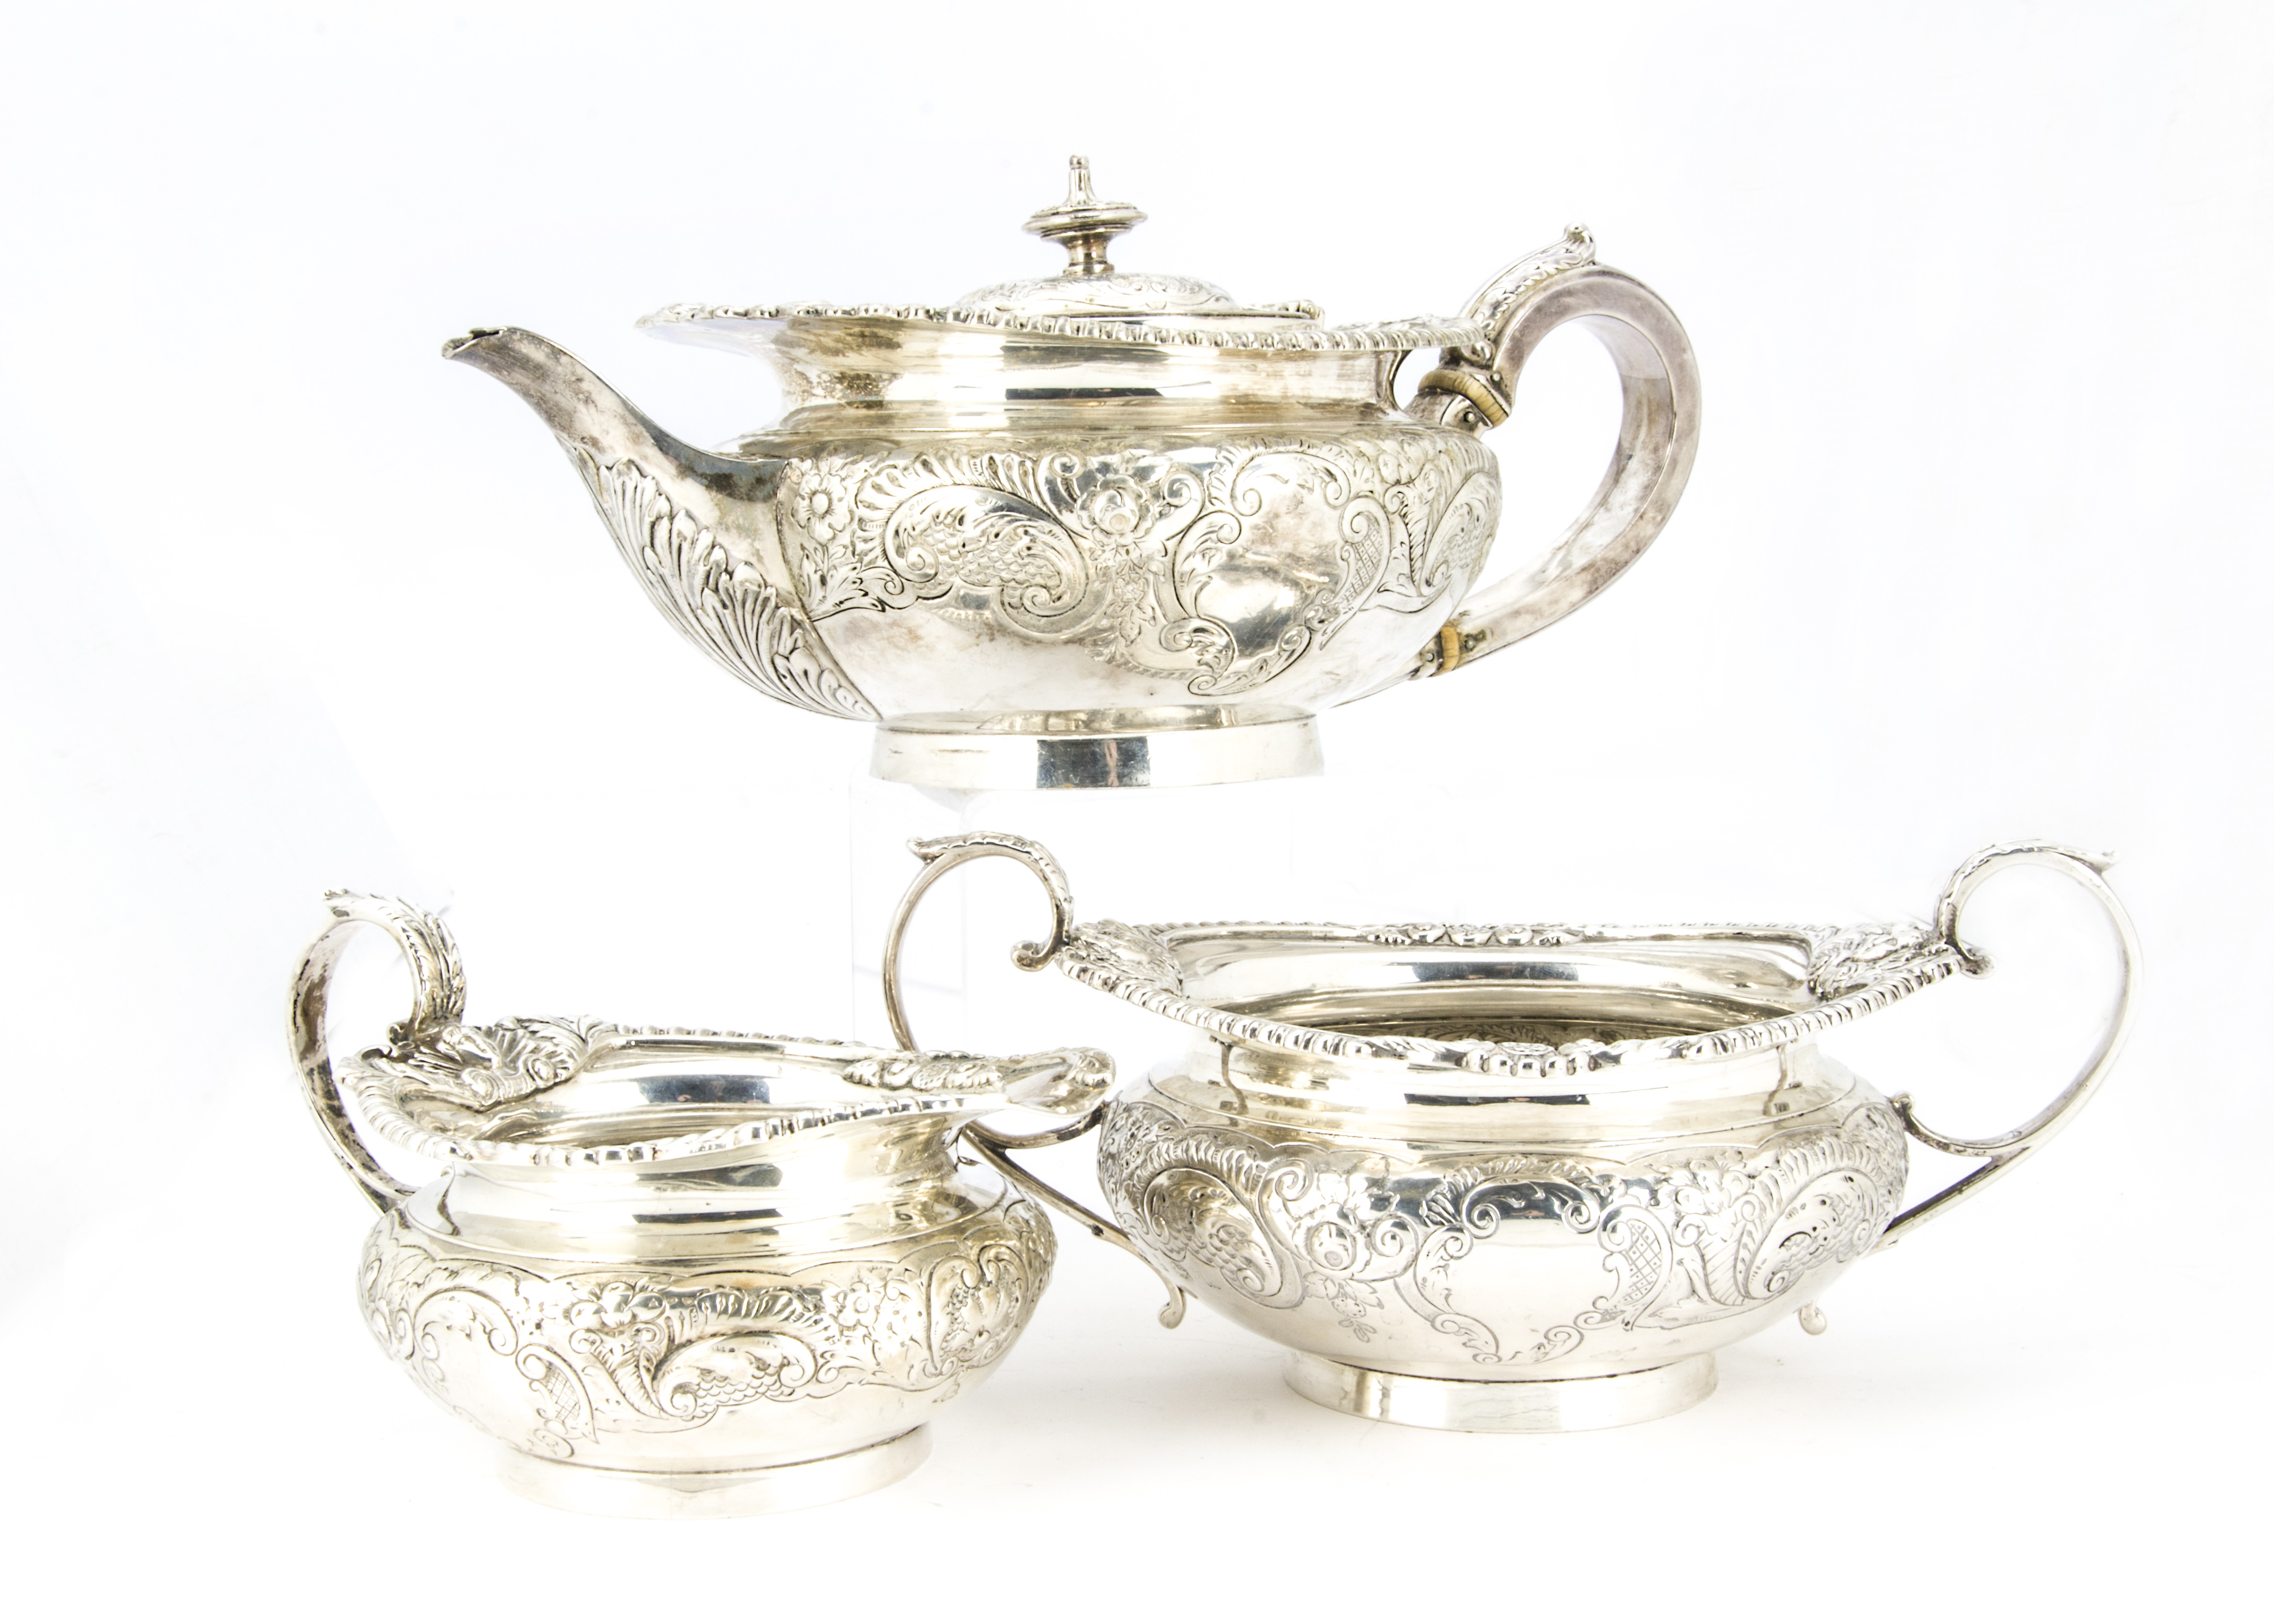 An Edwardian silver three piece tea set by Elkington & Co, squat form with ornate shell, mask and